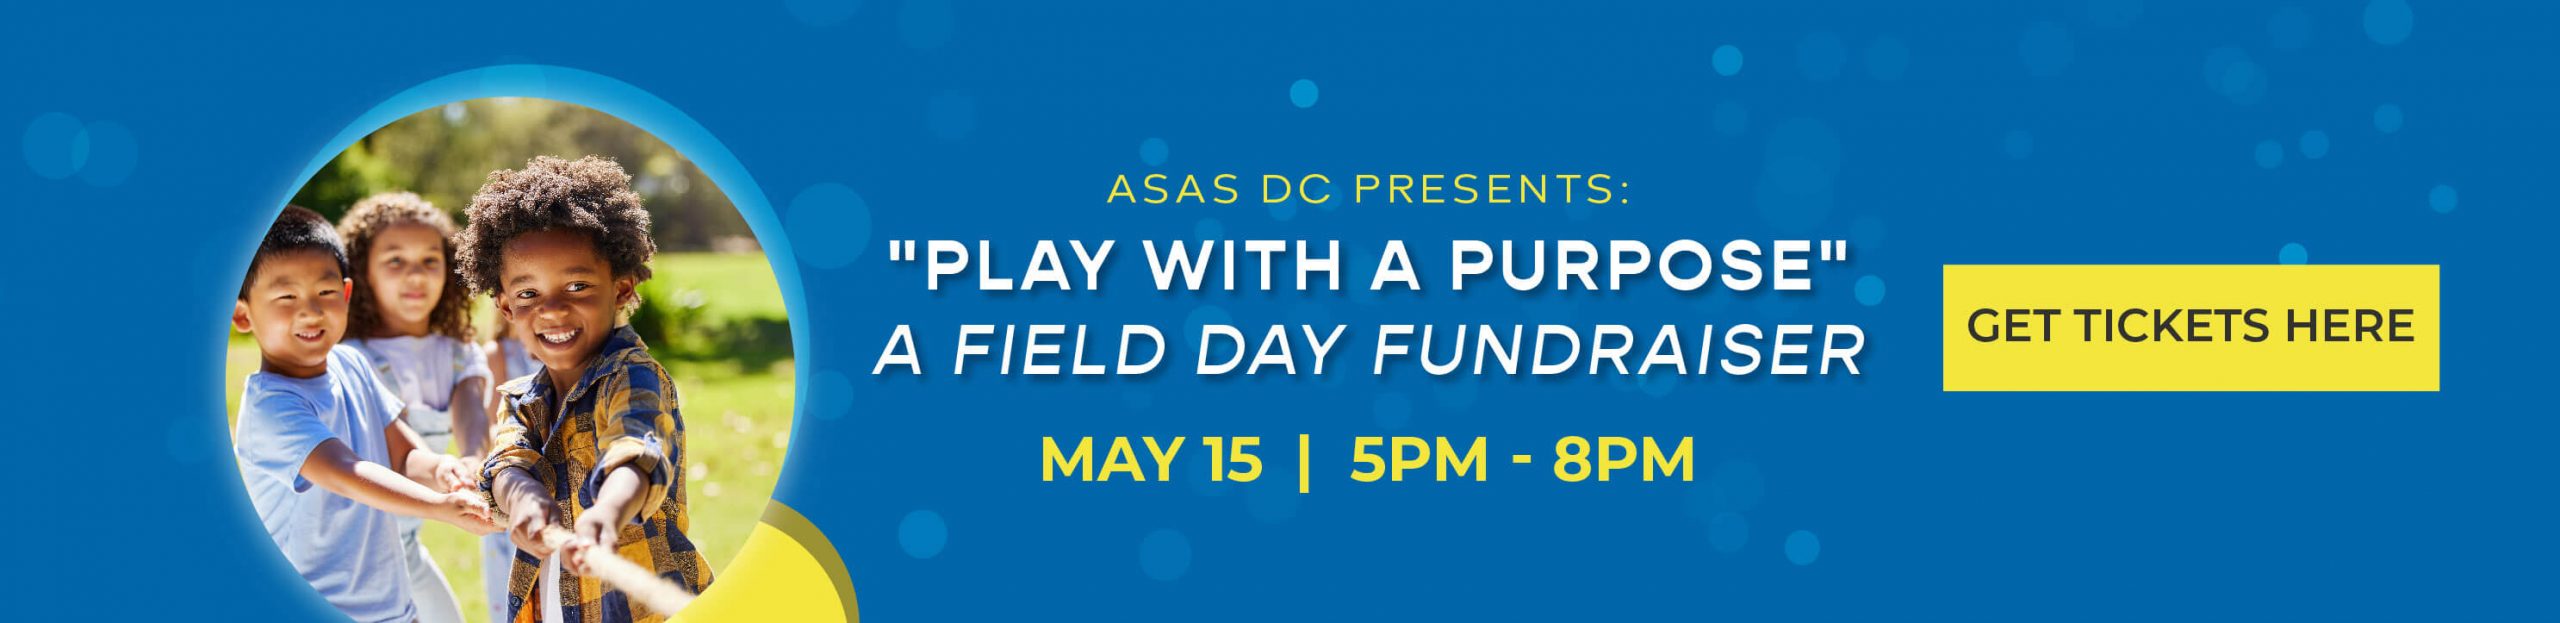 ASAS DC Presents: "Play with a Purpose" A Field Day Fundraiser